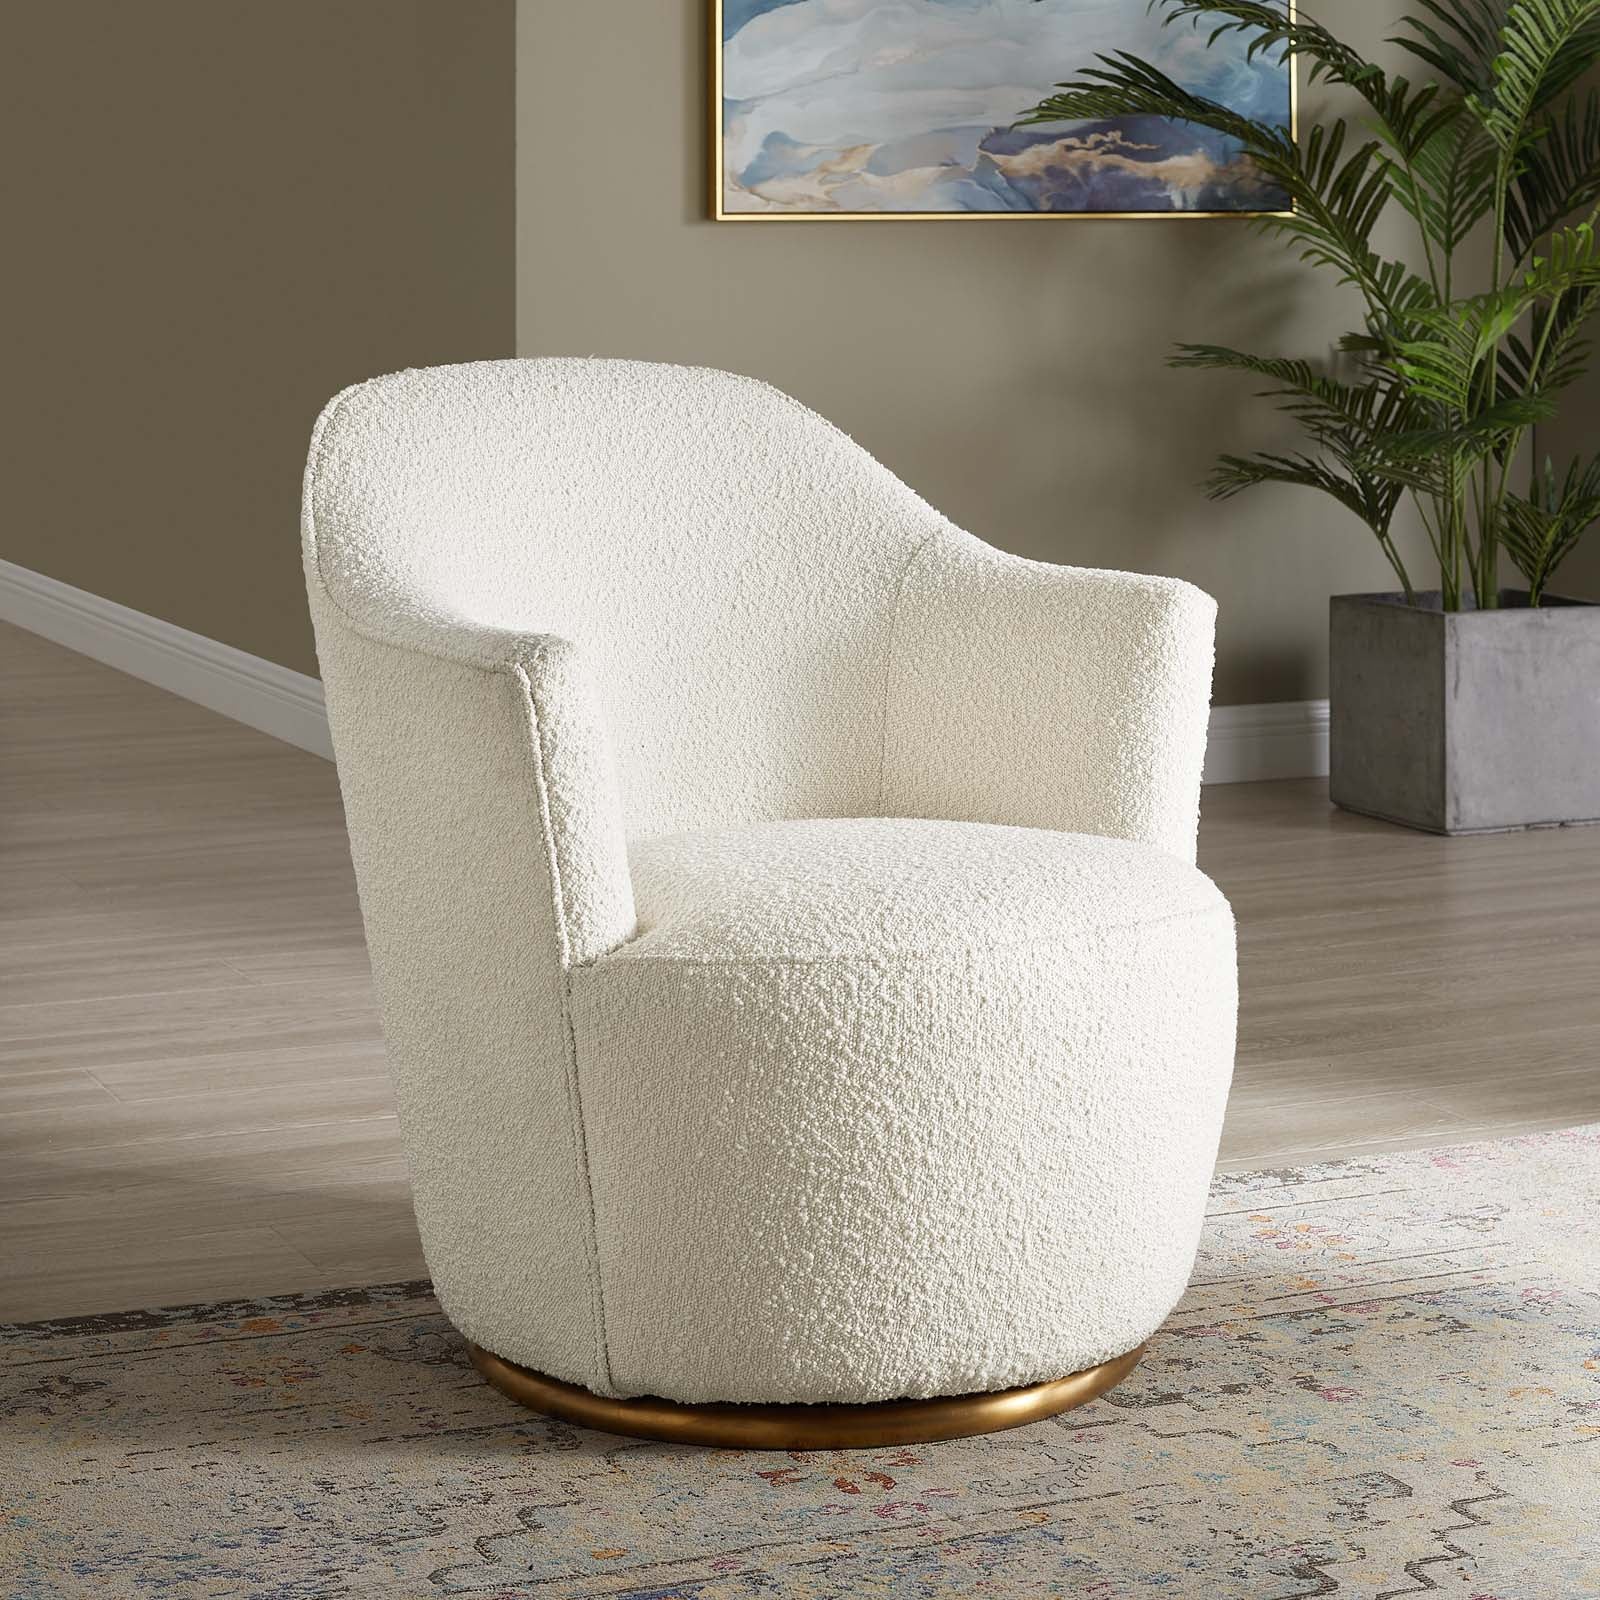 Nora Boucle Upholstered Swivel Chair